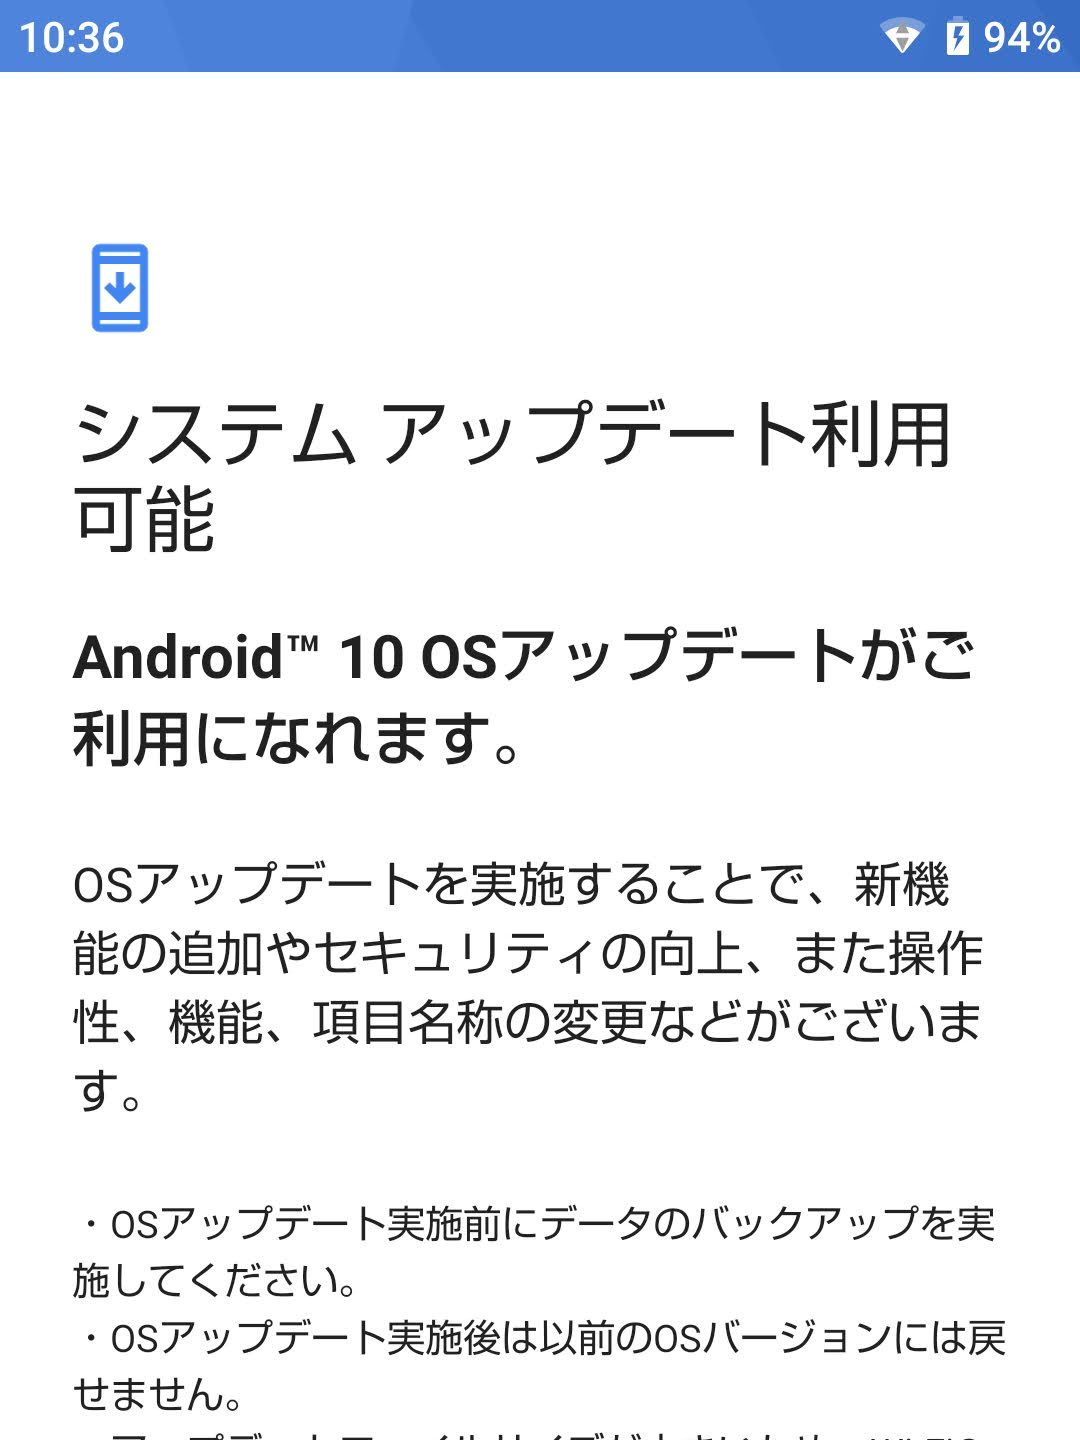 Android 10へのアップデート